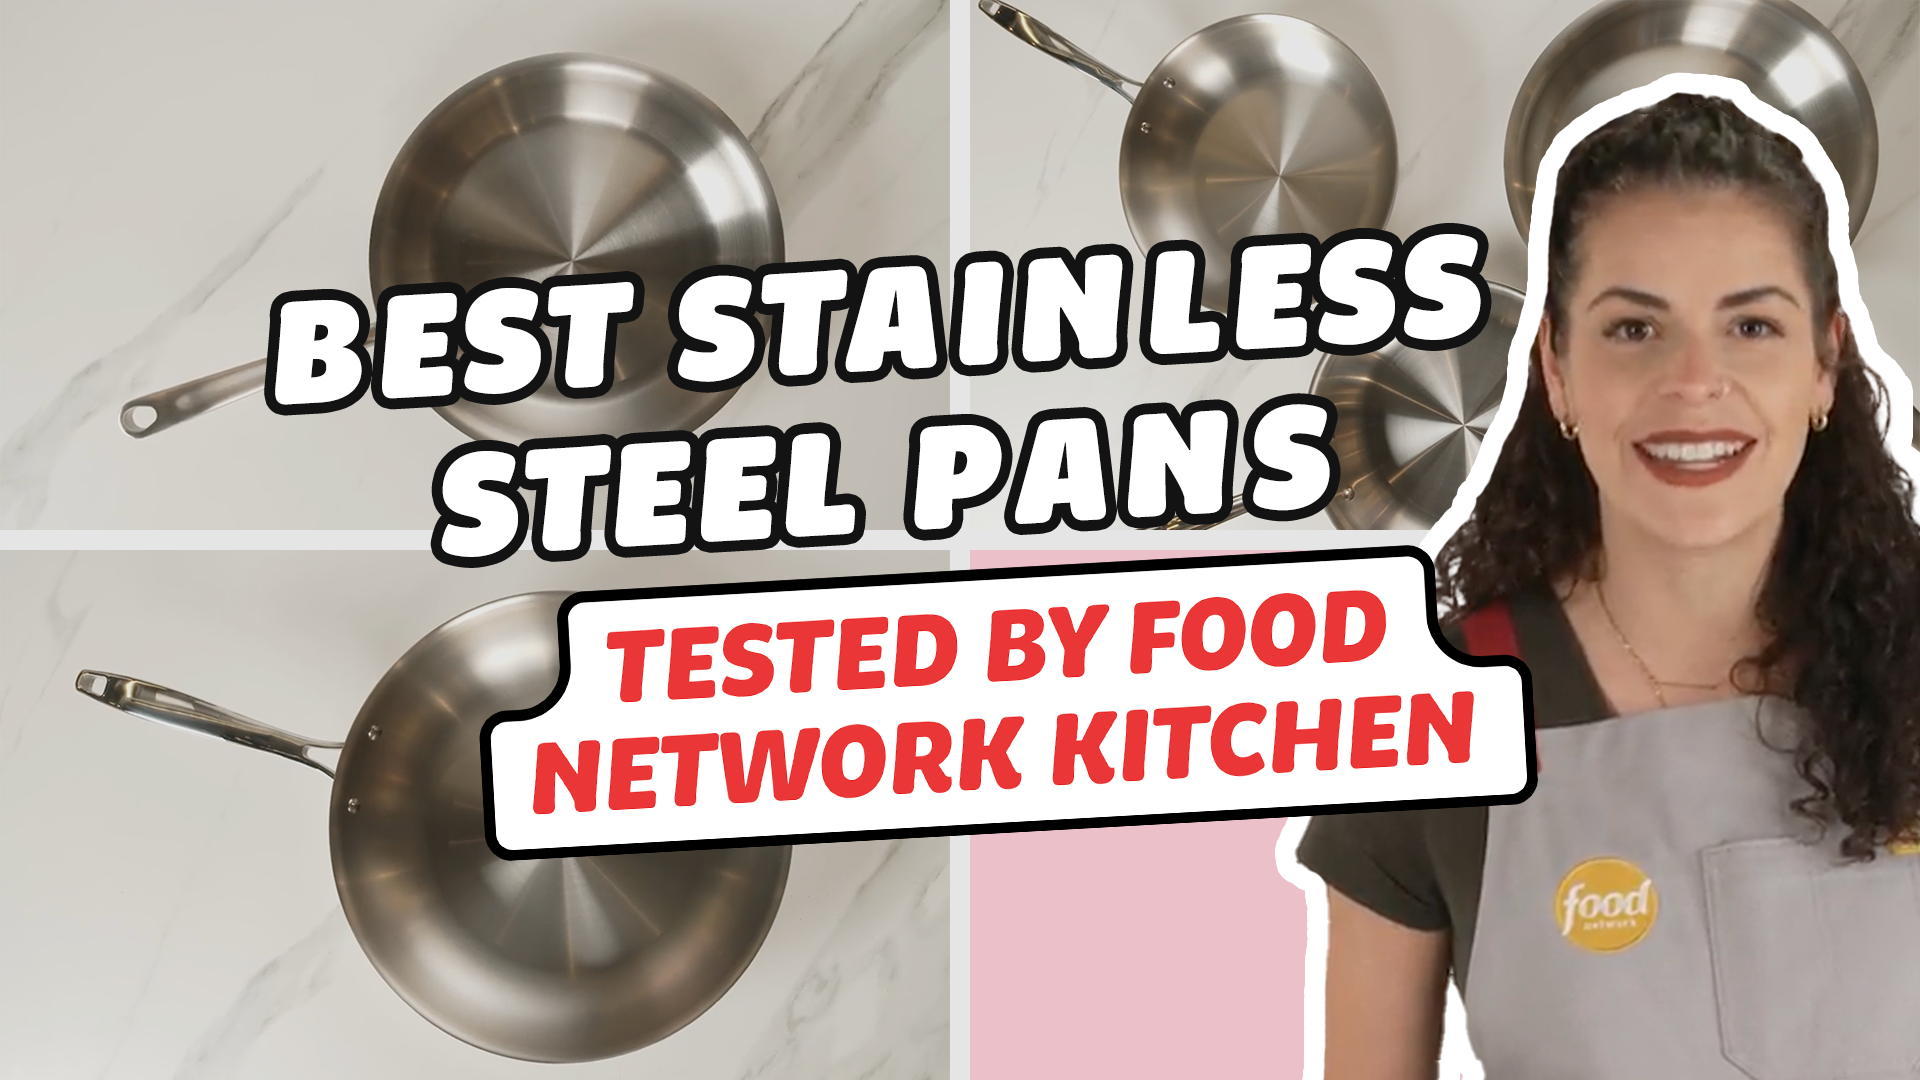 Best Stainless Steel Pans